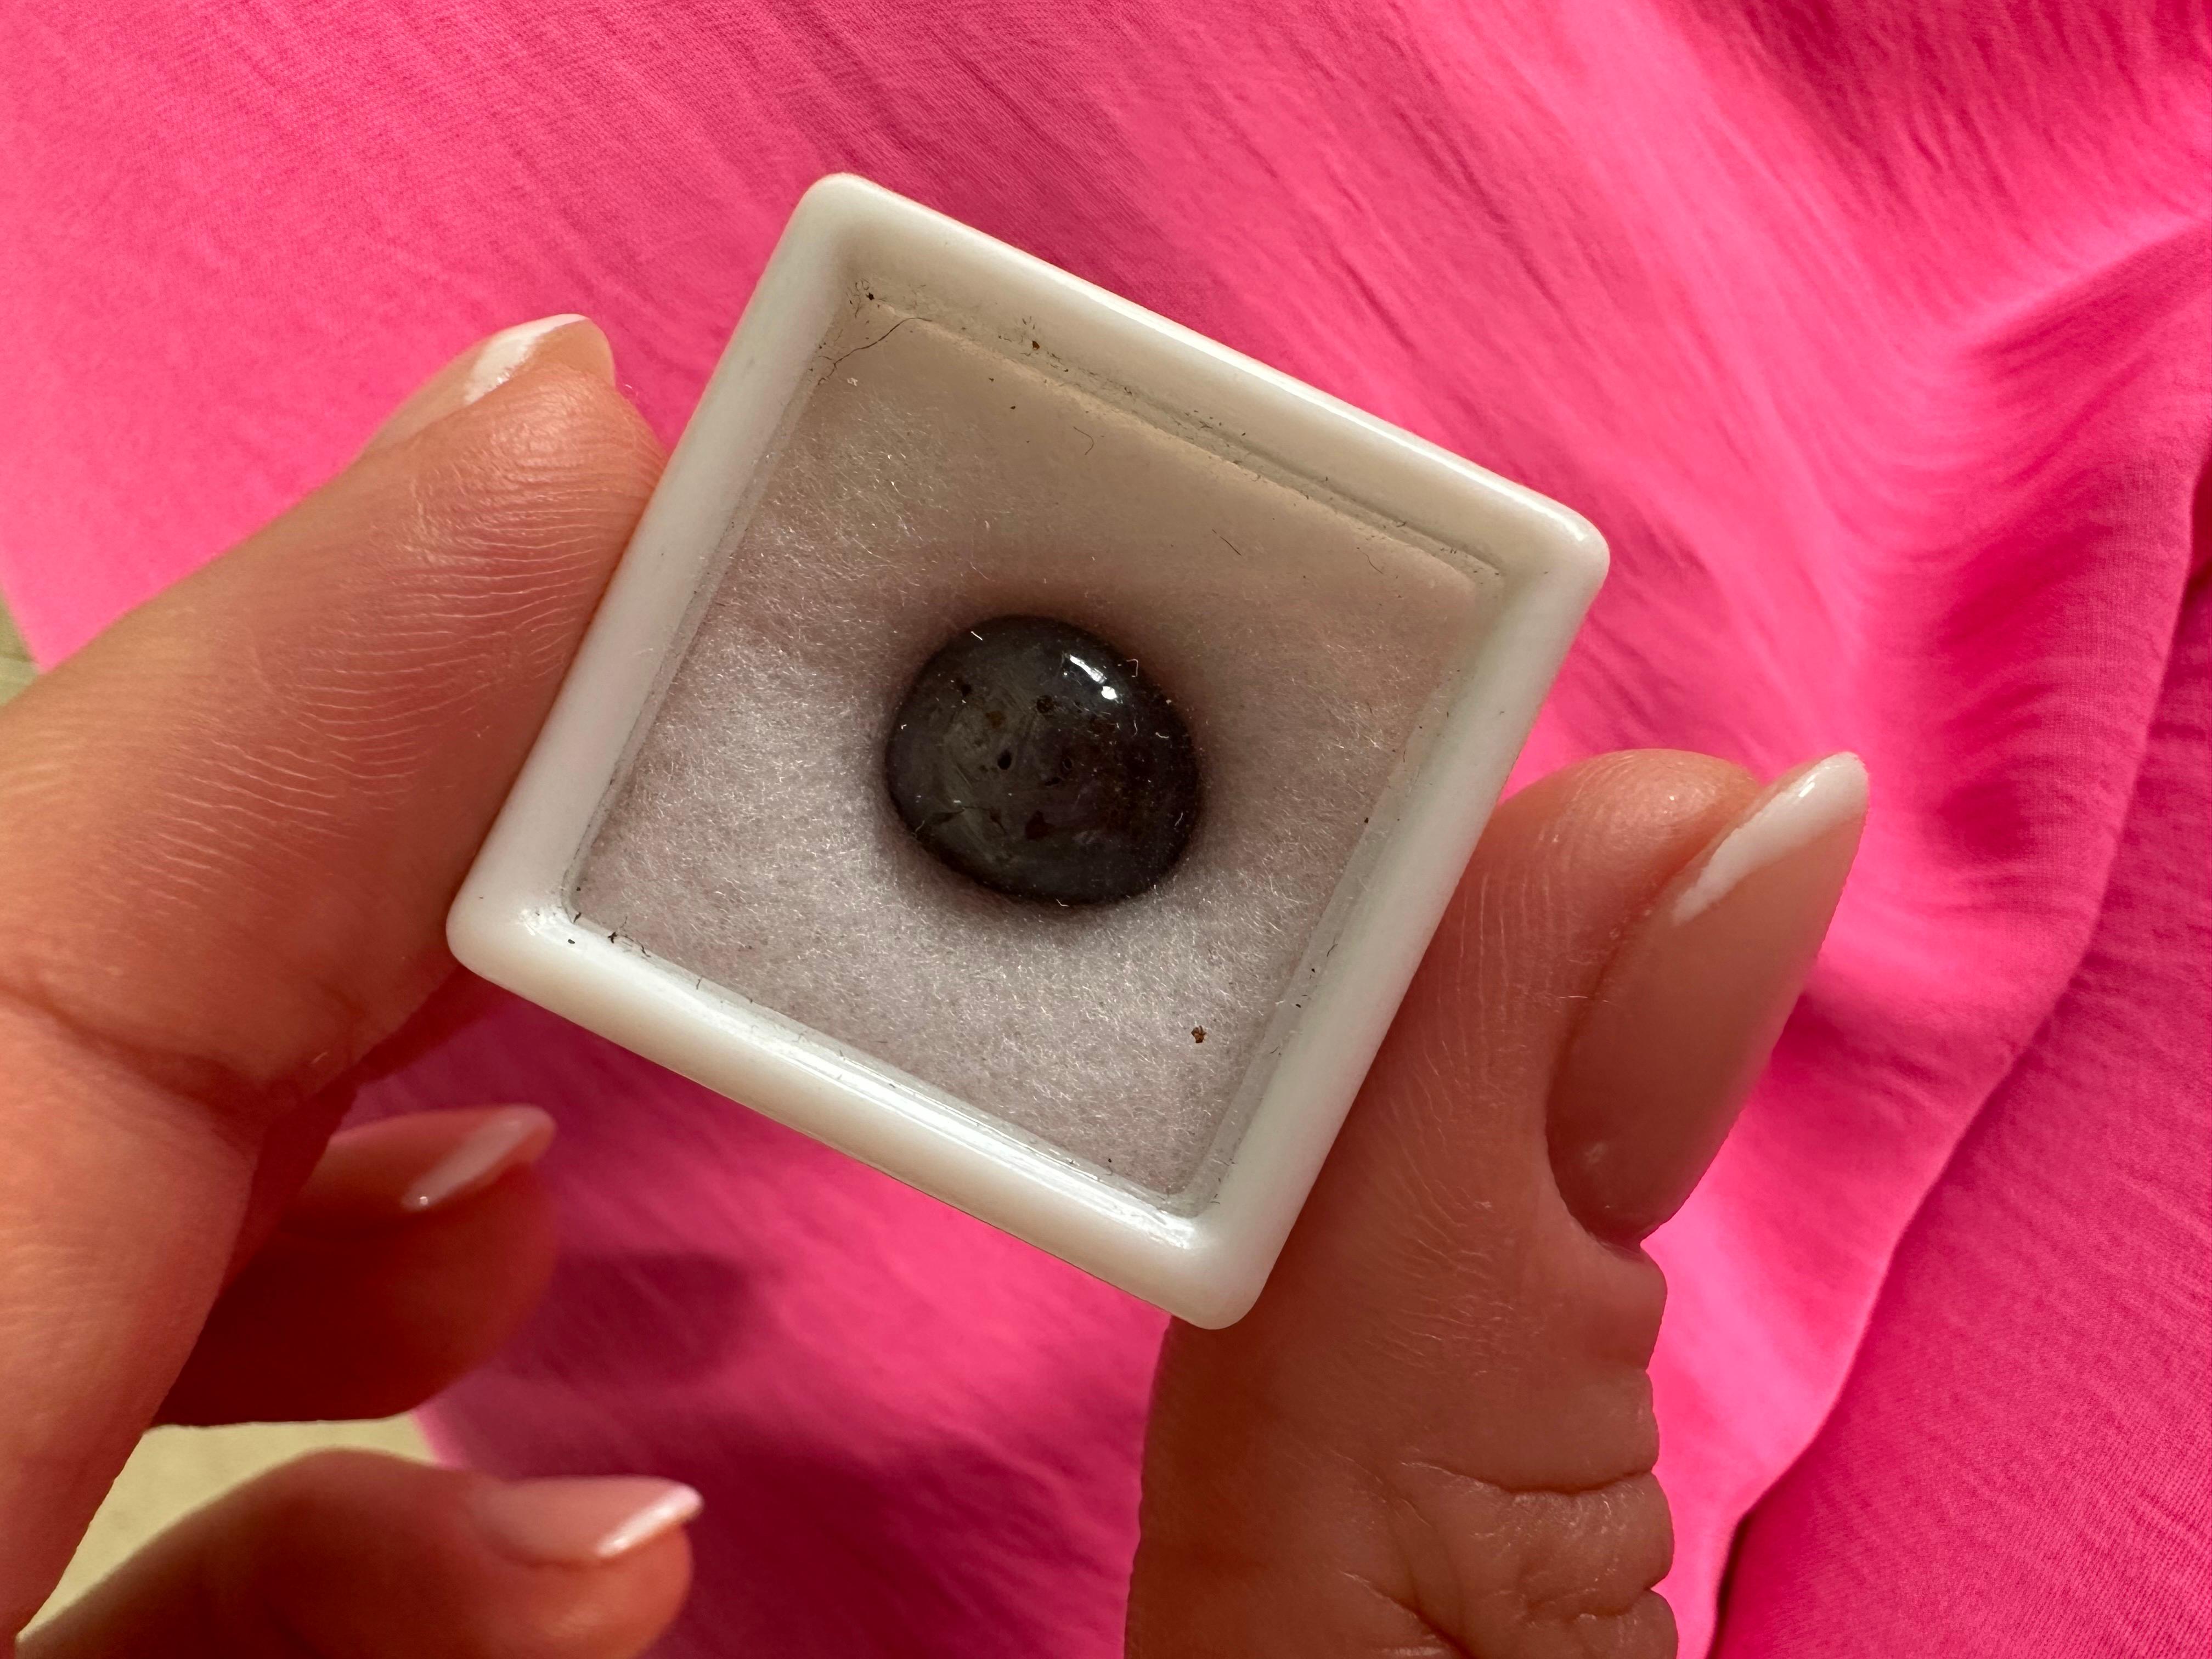 Rare untreated natural star sapphire, comes with box and certificate.

NATURAL GEMSTONE(S): NATURAL SAPPHIRE
Clarity/Color: Dark Blue
Cut: Oval Cab 11.3x9.8mm
Treatment: heat


WHAT YOU GET AT STAMPAR JEWELERS:
Stampar Jewelers, located in the heart